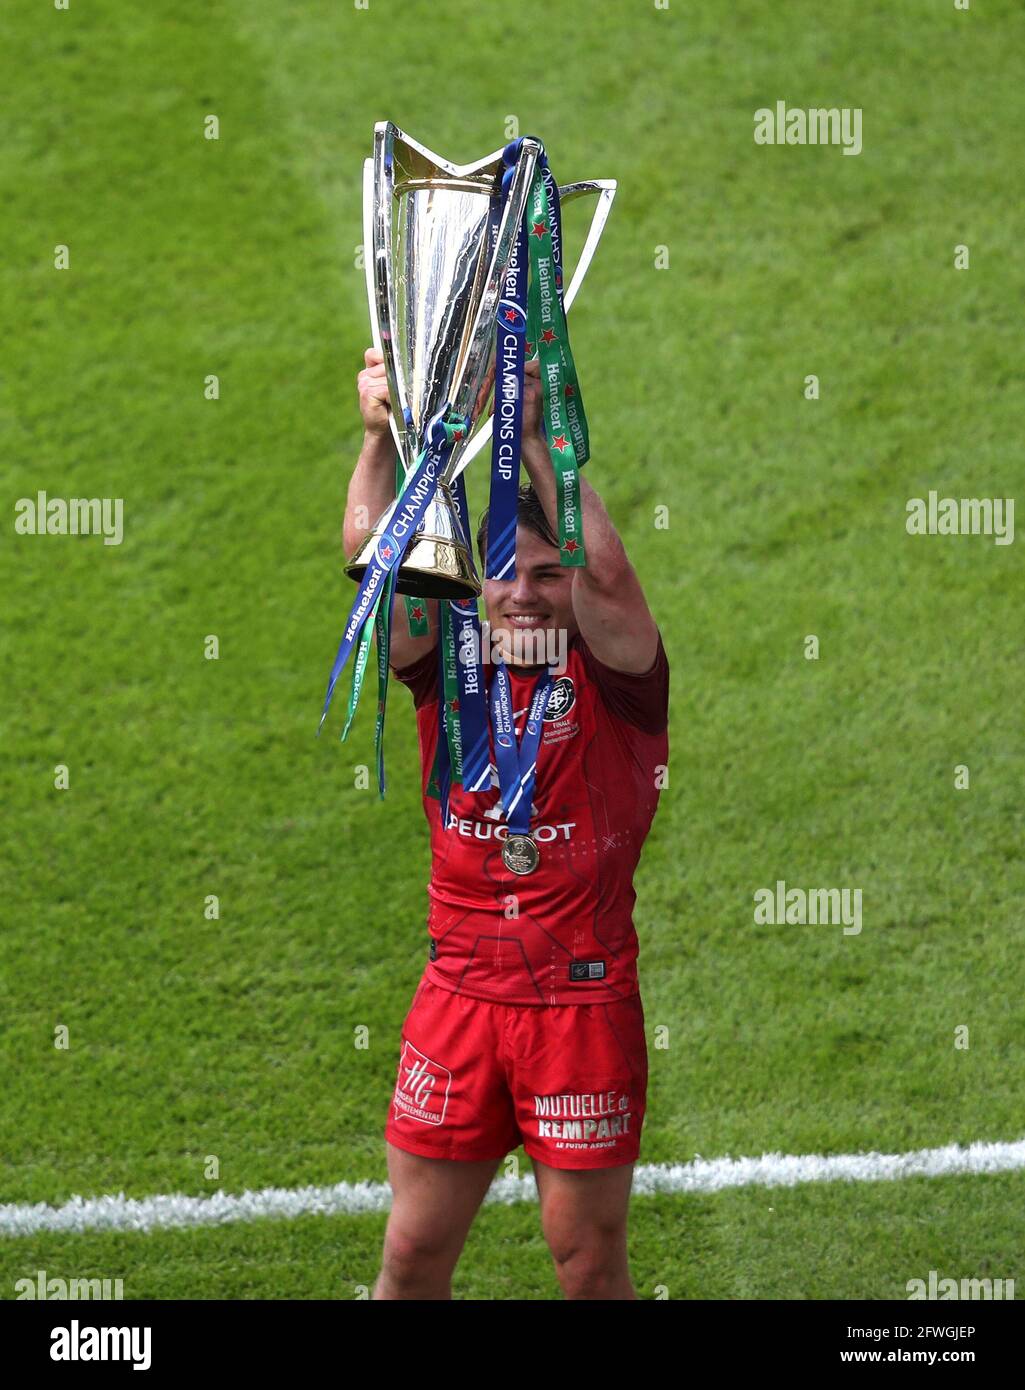 Toulouse S Antoine Dupont During The Heineken Champions Cup Quarter Final Match At Aviva Stadium Dublin Picture Date Saturday May 7 22 Stock Photo Alamy